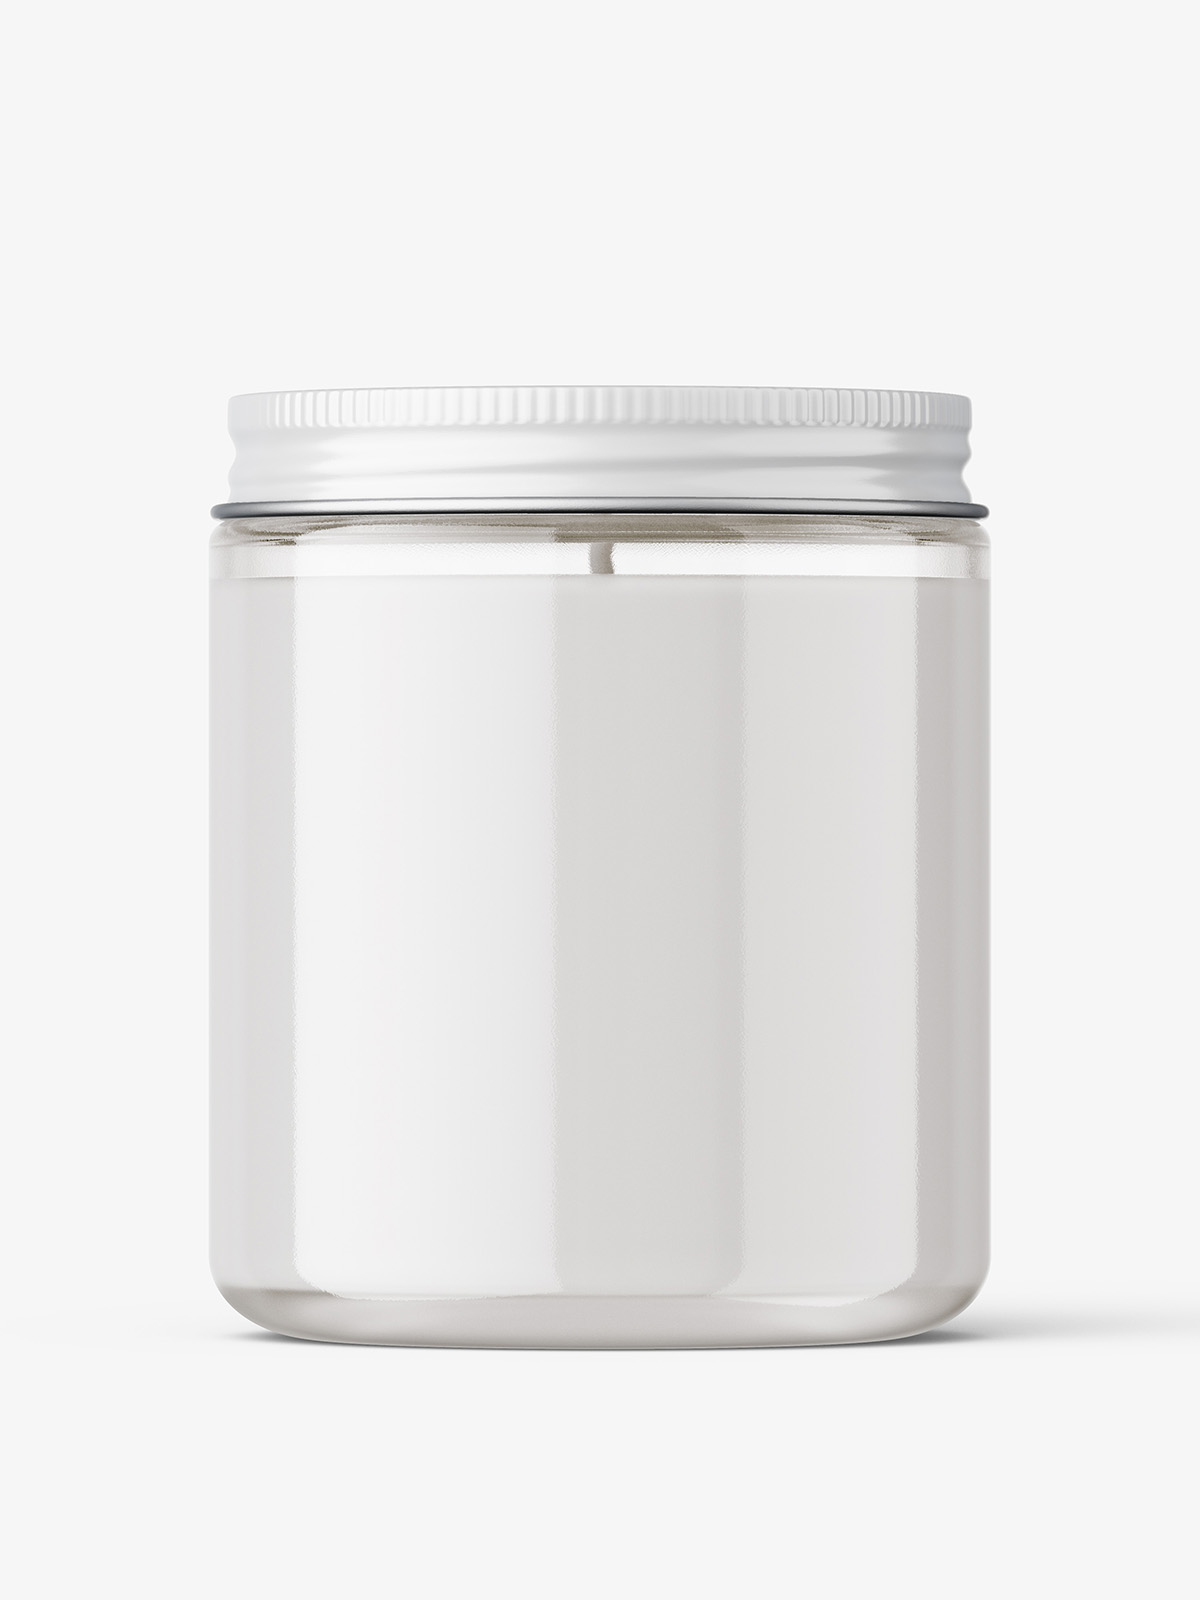 Download Candle In Glass Jar Mockup Clear Smarty Mockups